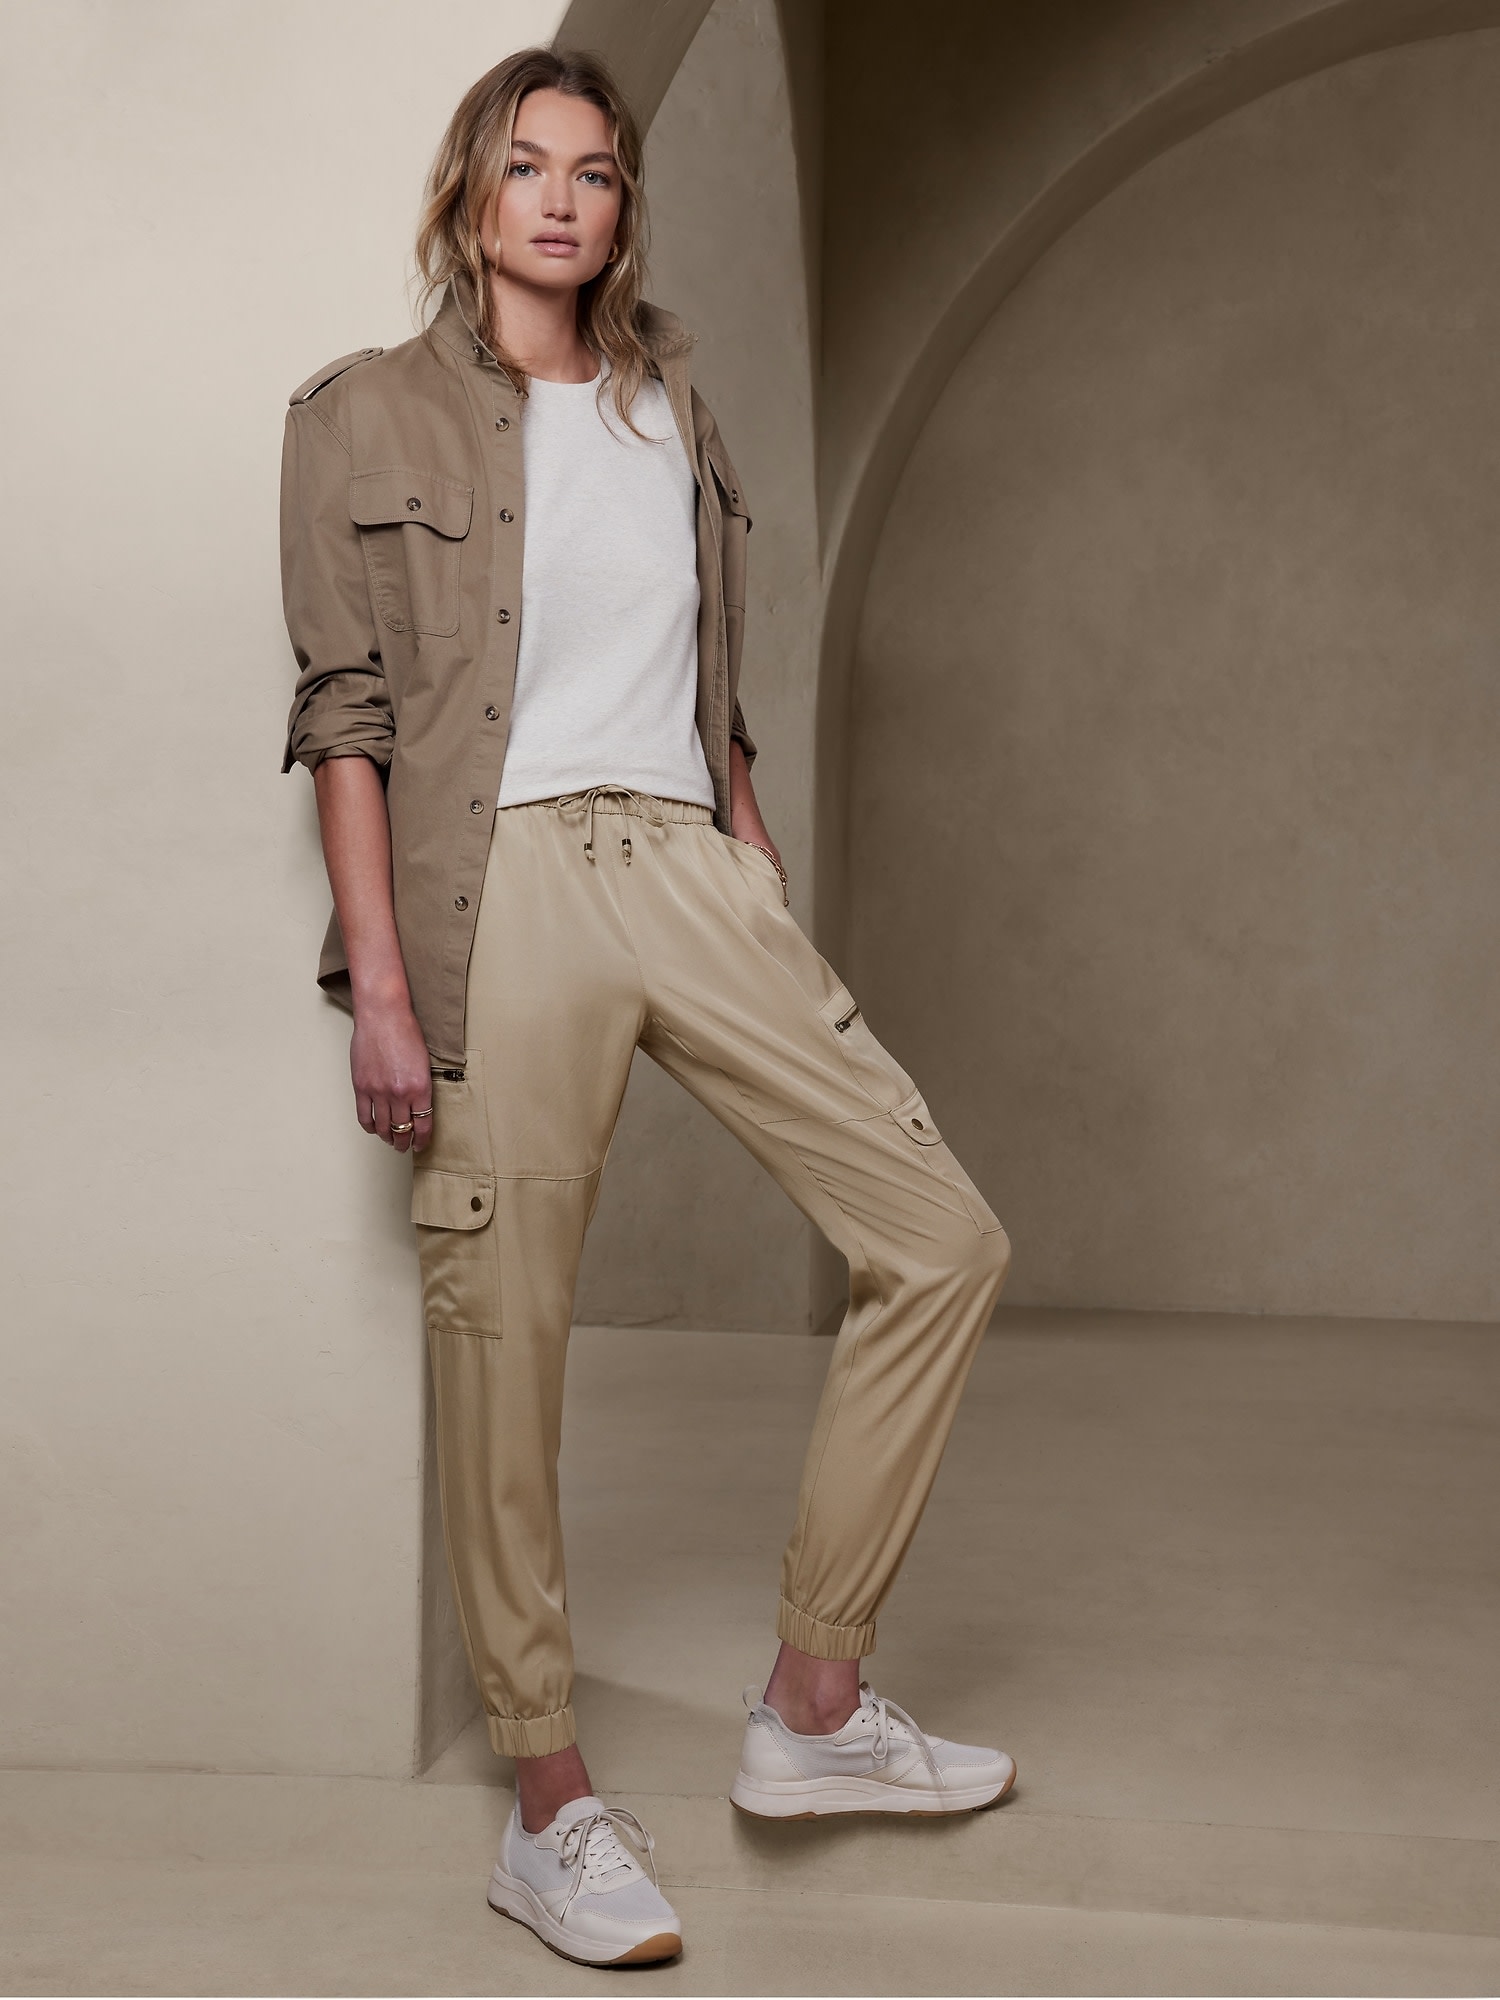 beige #pants #outfit #dressy Khakis | Beige outfit, Chino pants women,  Fashion outfits